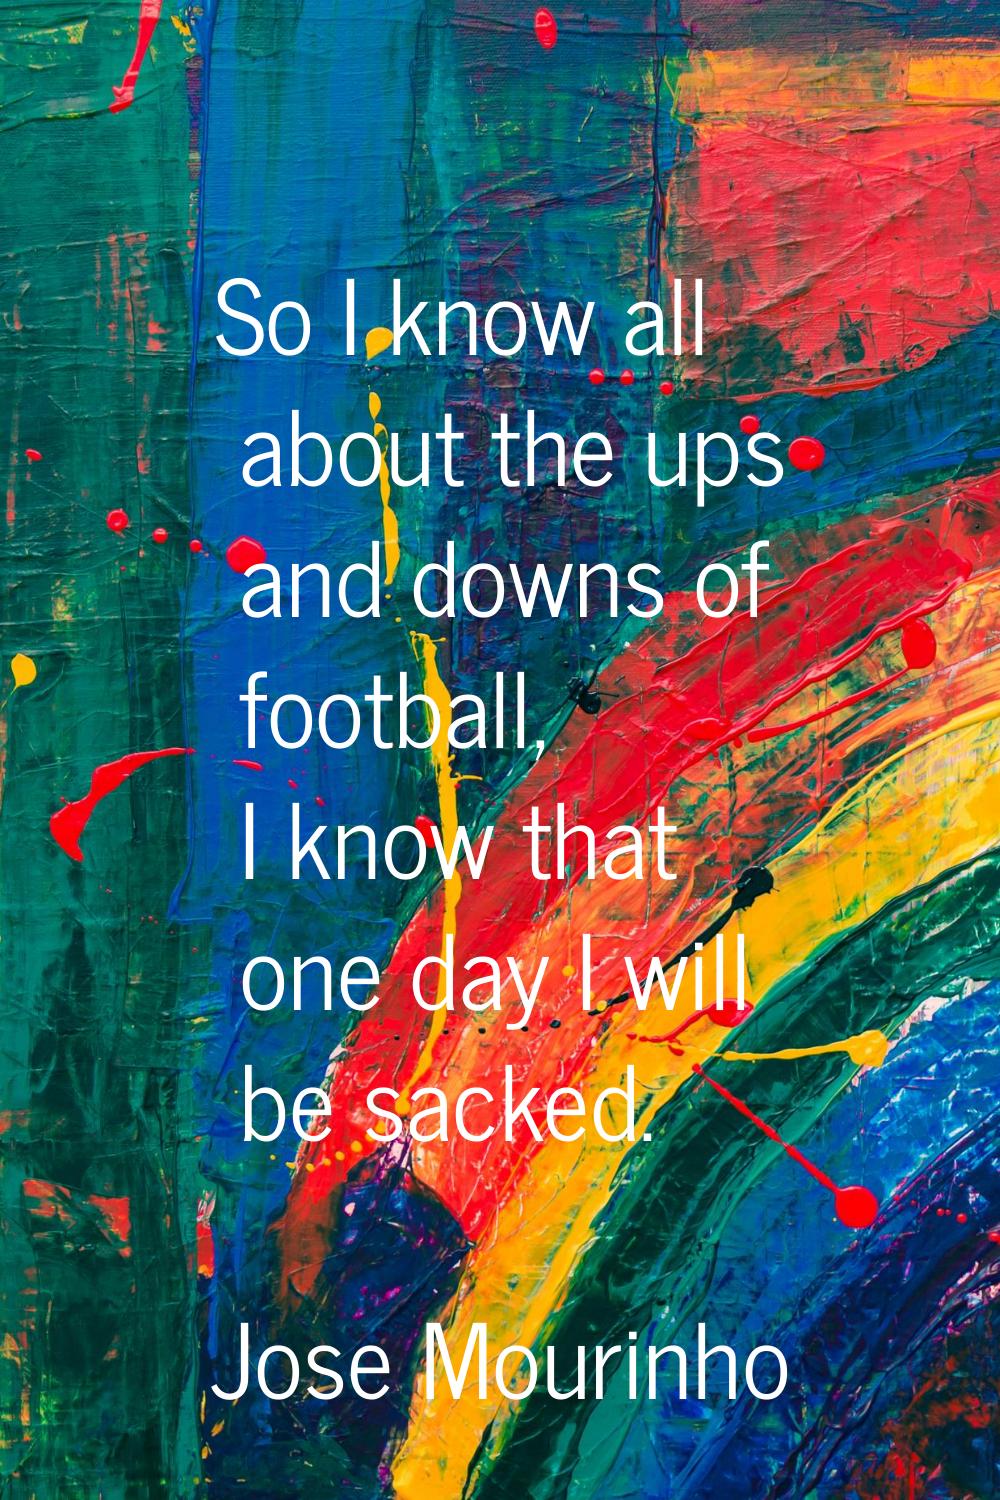 So I know all about the ups and downs of football, I know that one day I will be sacked.